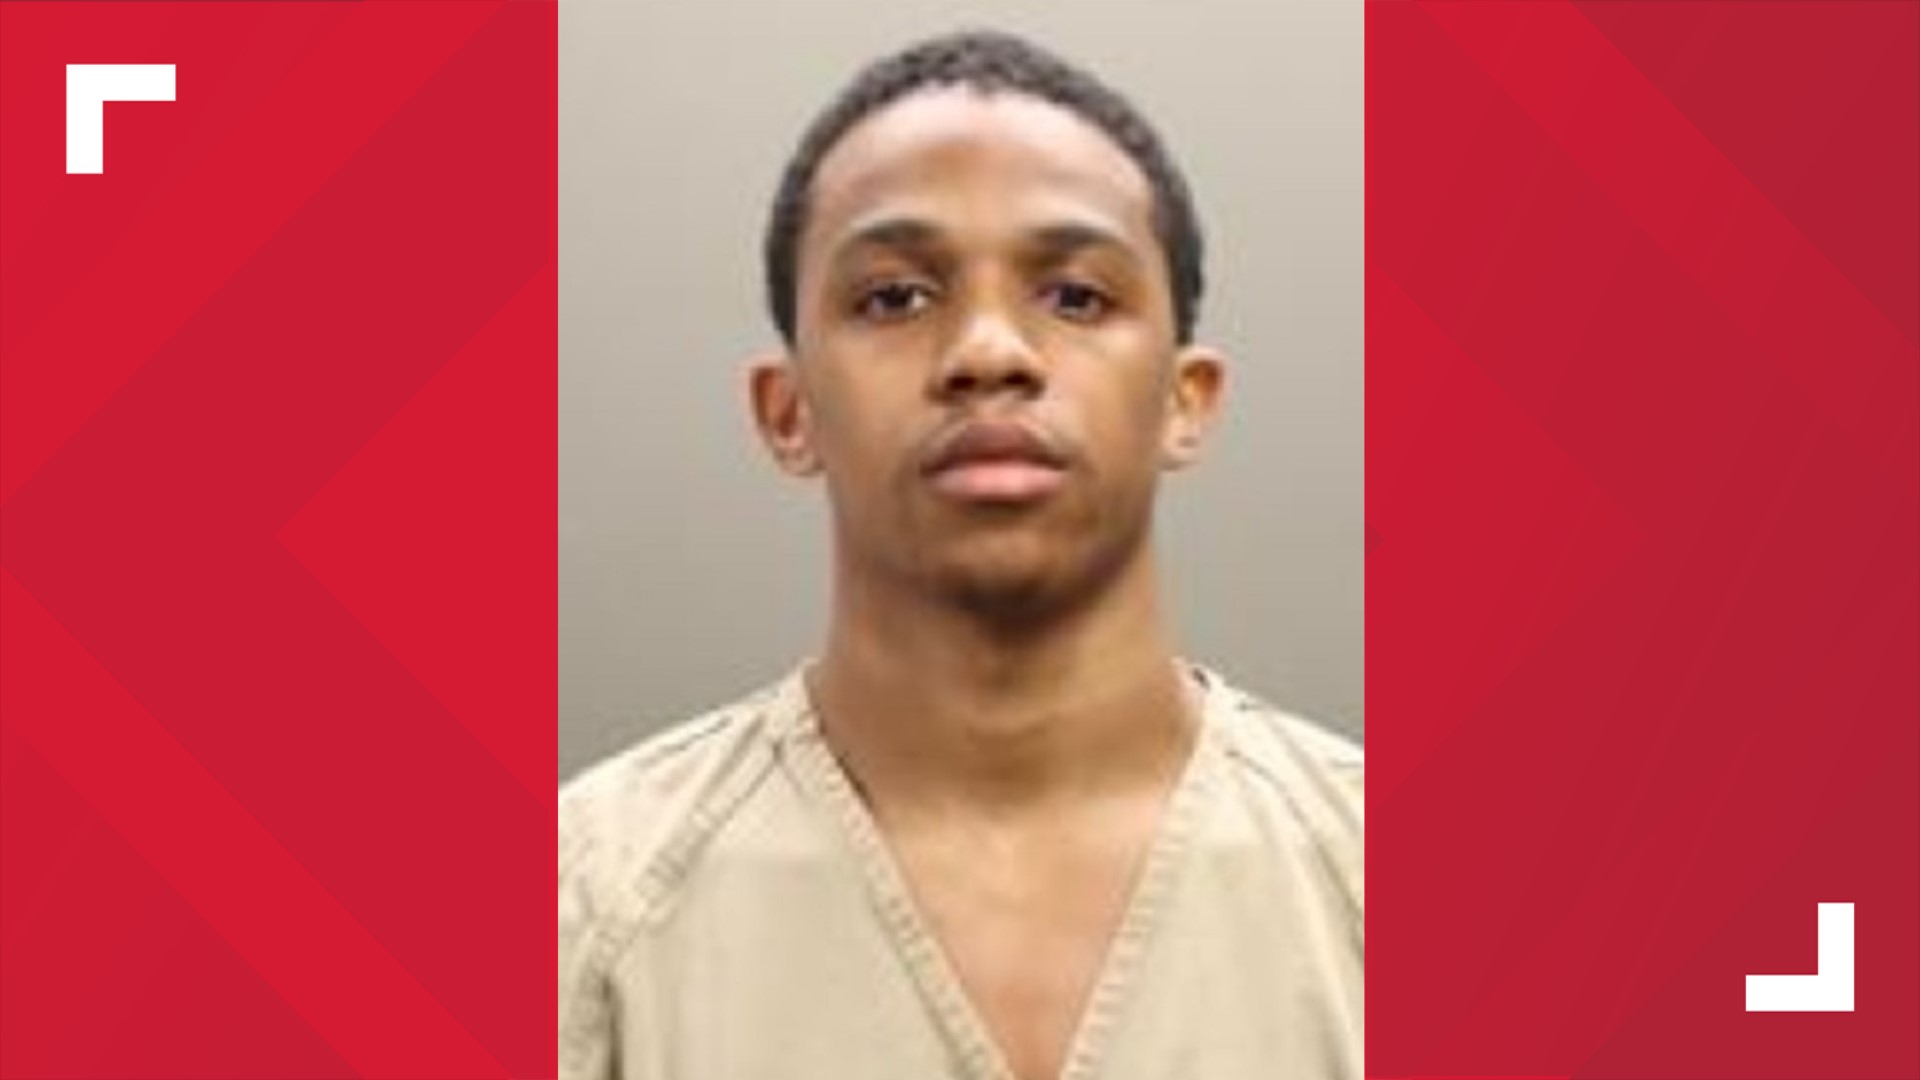 Travaughn McConnell, 20, was arrested Saturday on charges of attempted murder and felonious assault.